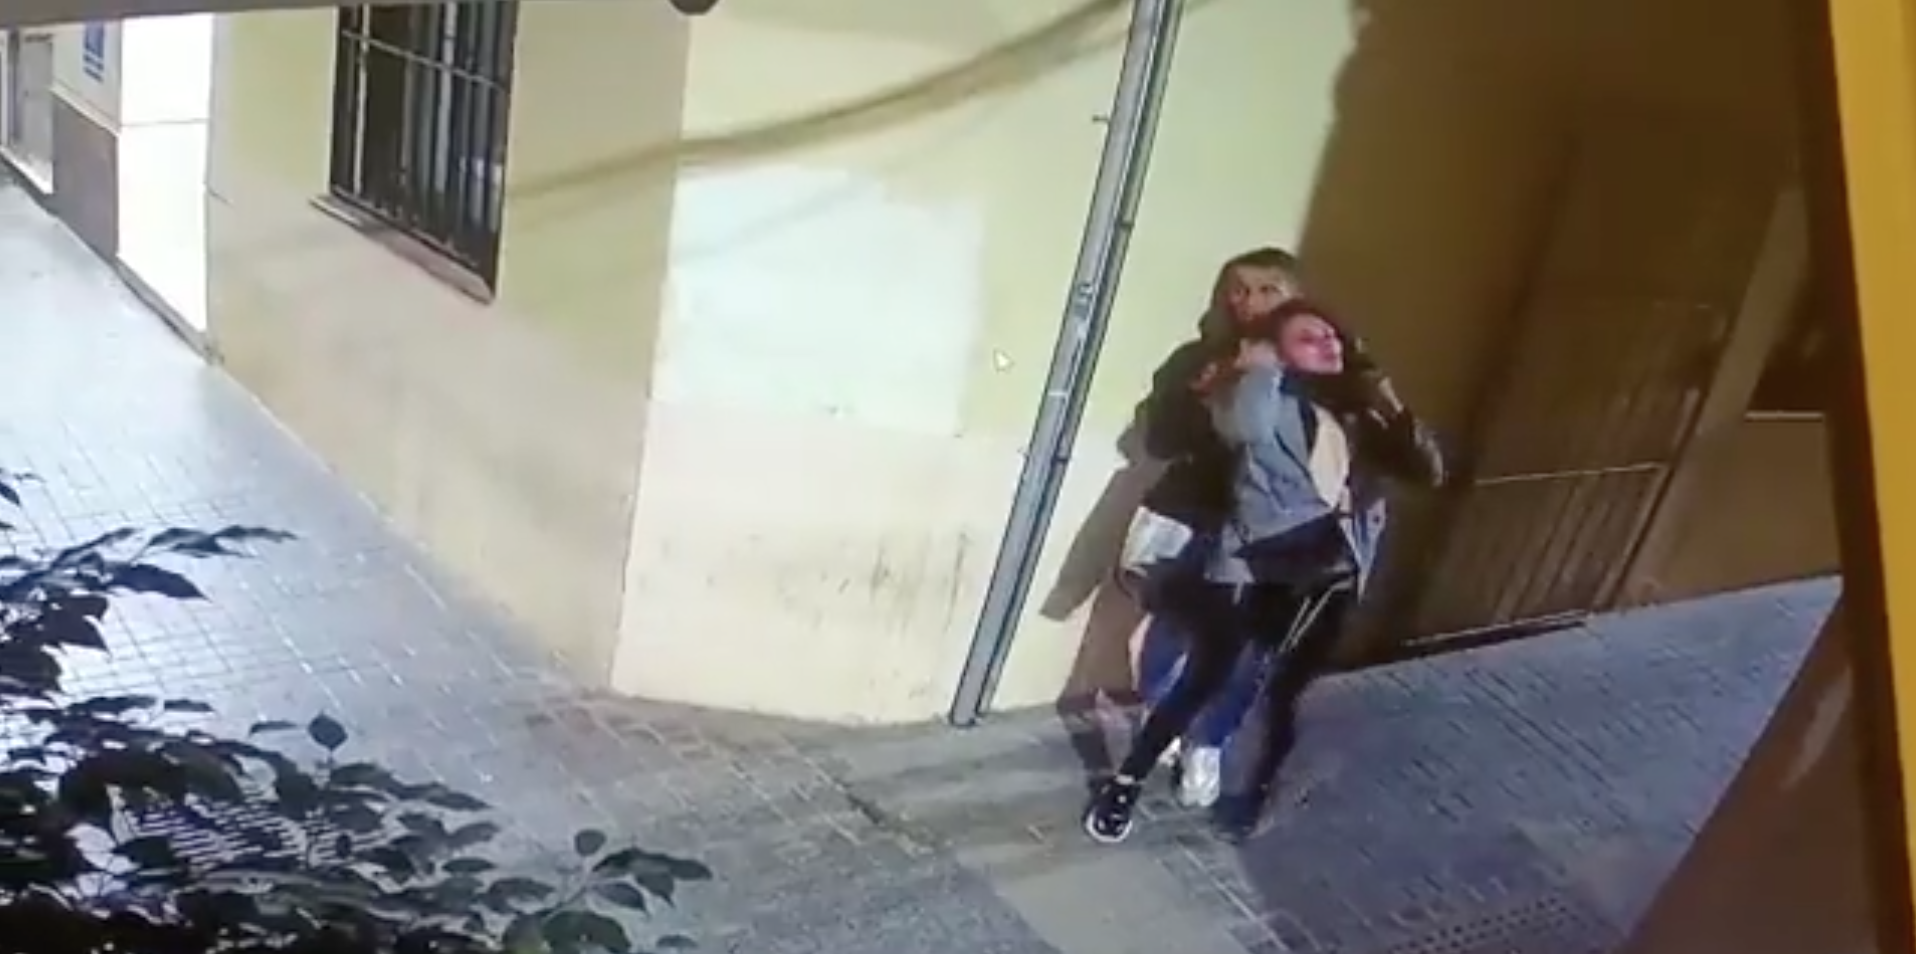 Thieves caught on camera in Spain’s Málaga using ‘lion killer’ choking method to steal from female victim
– News X